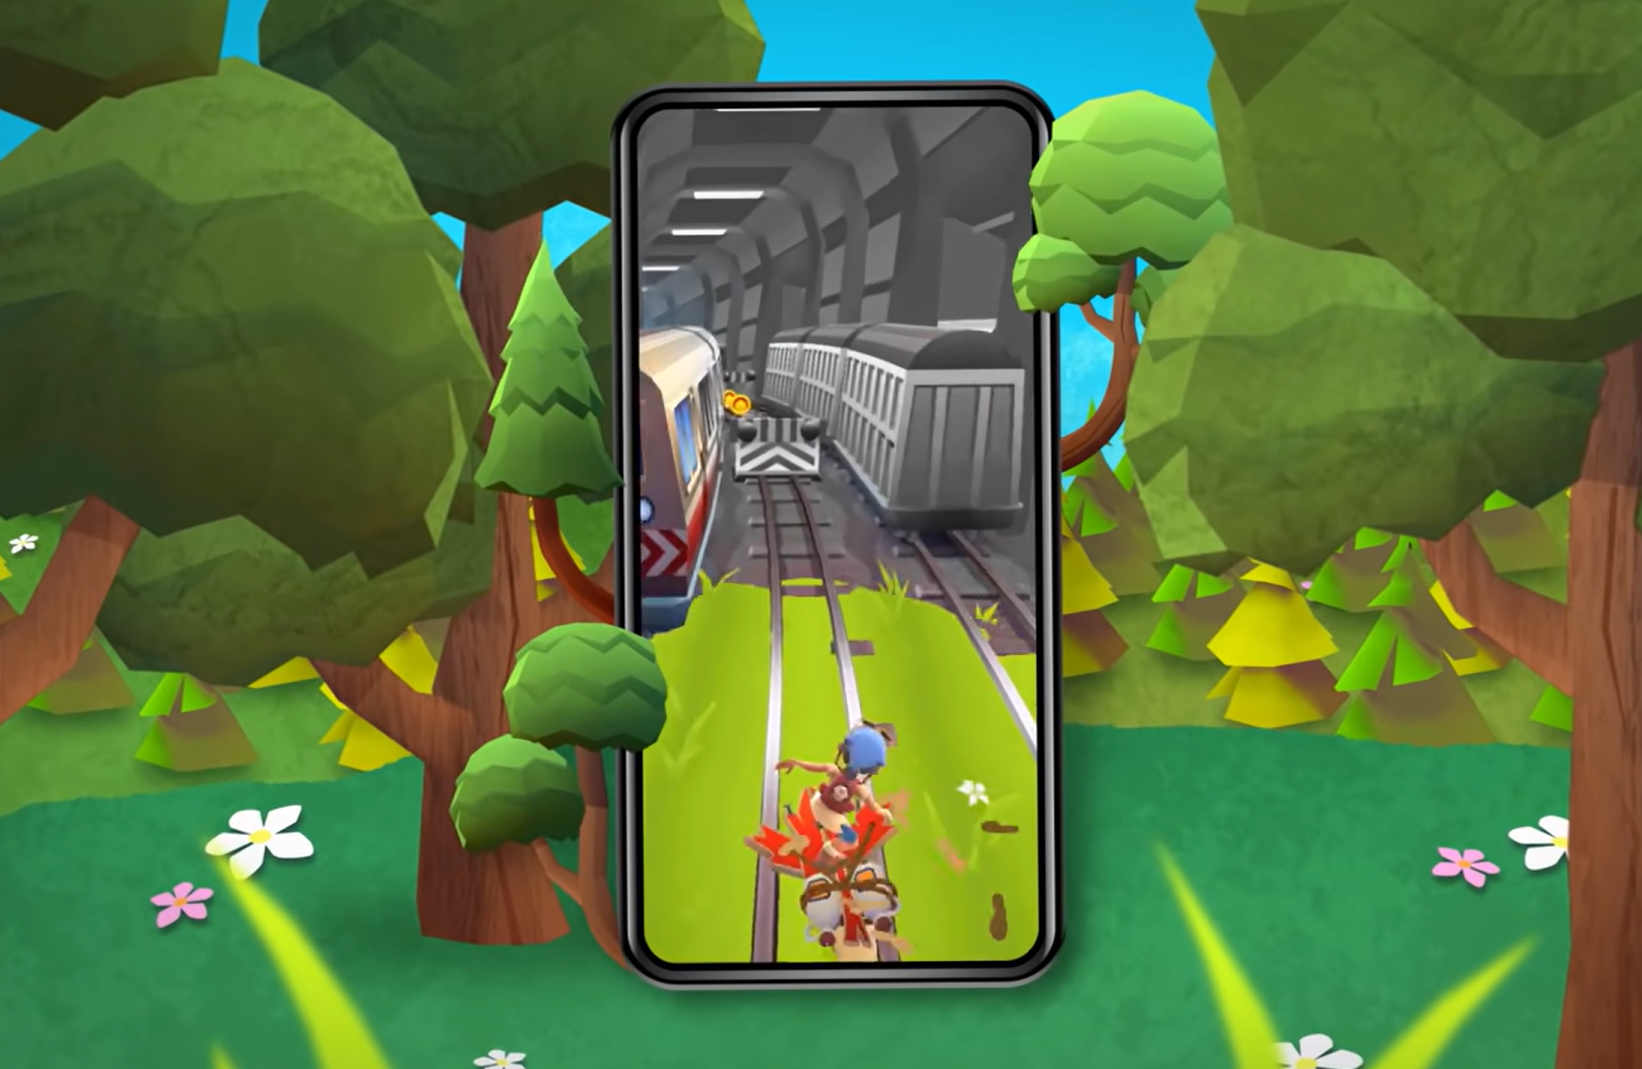 Subway Surfers moblie game features new Vancouver map - Vancouver Is Awesome